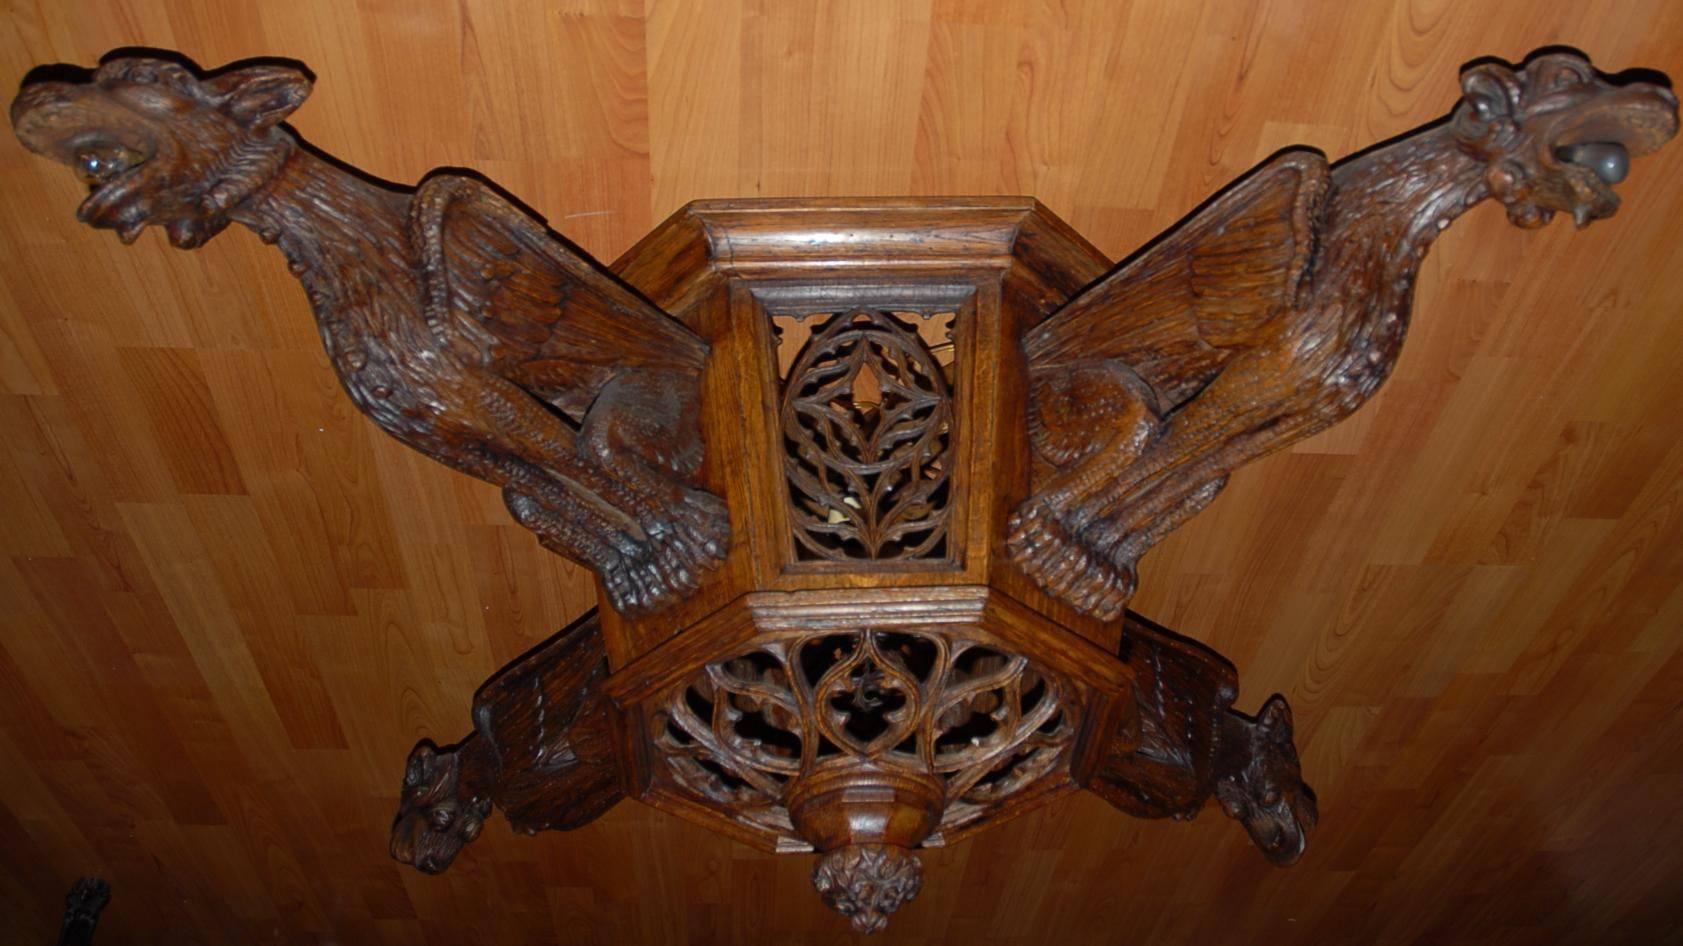 French Enormous Hand-Carved Gothic Revival Art, Four Gargoyles Ceiling Light Fixture